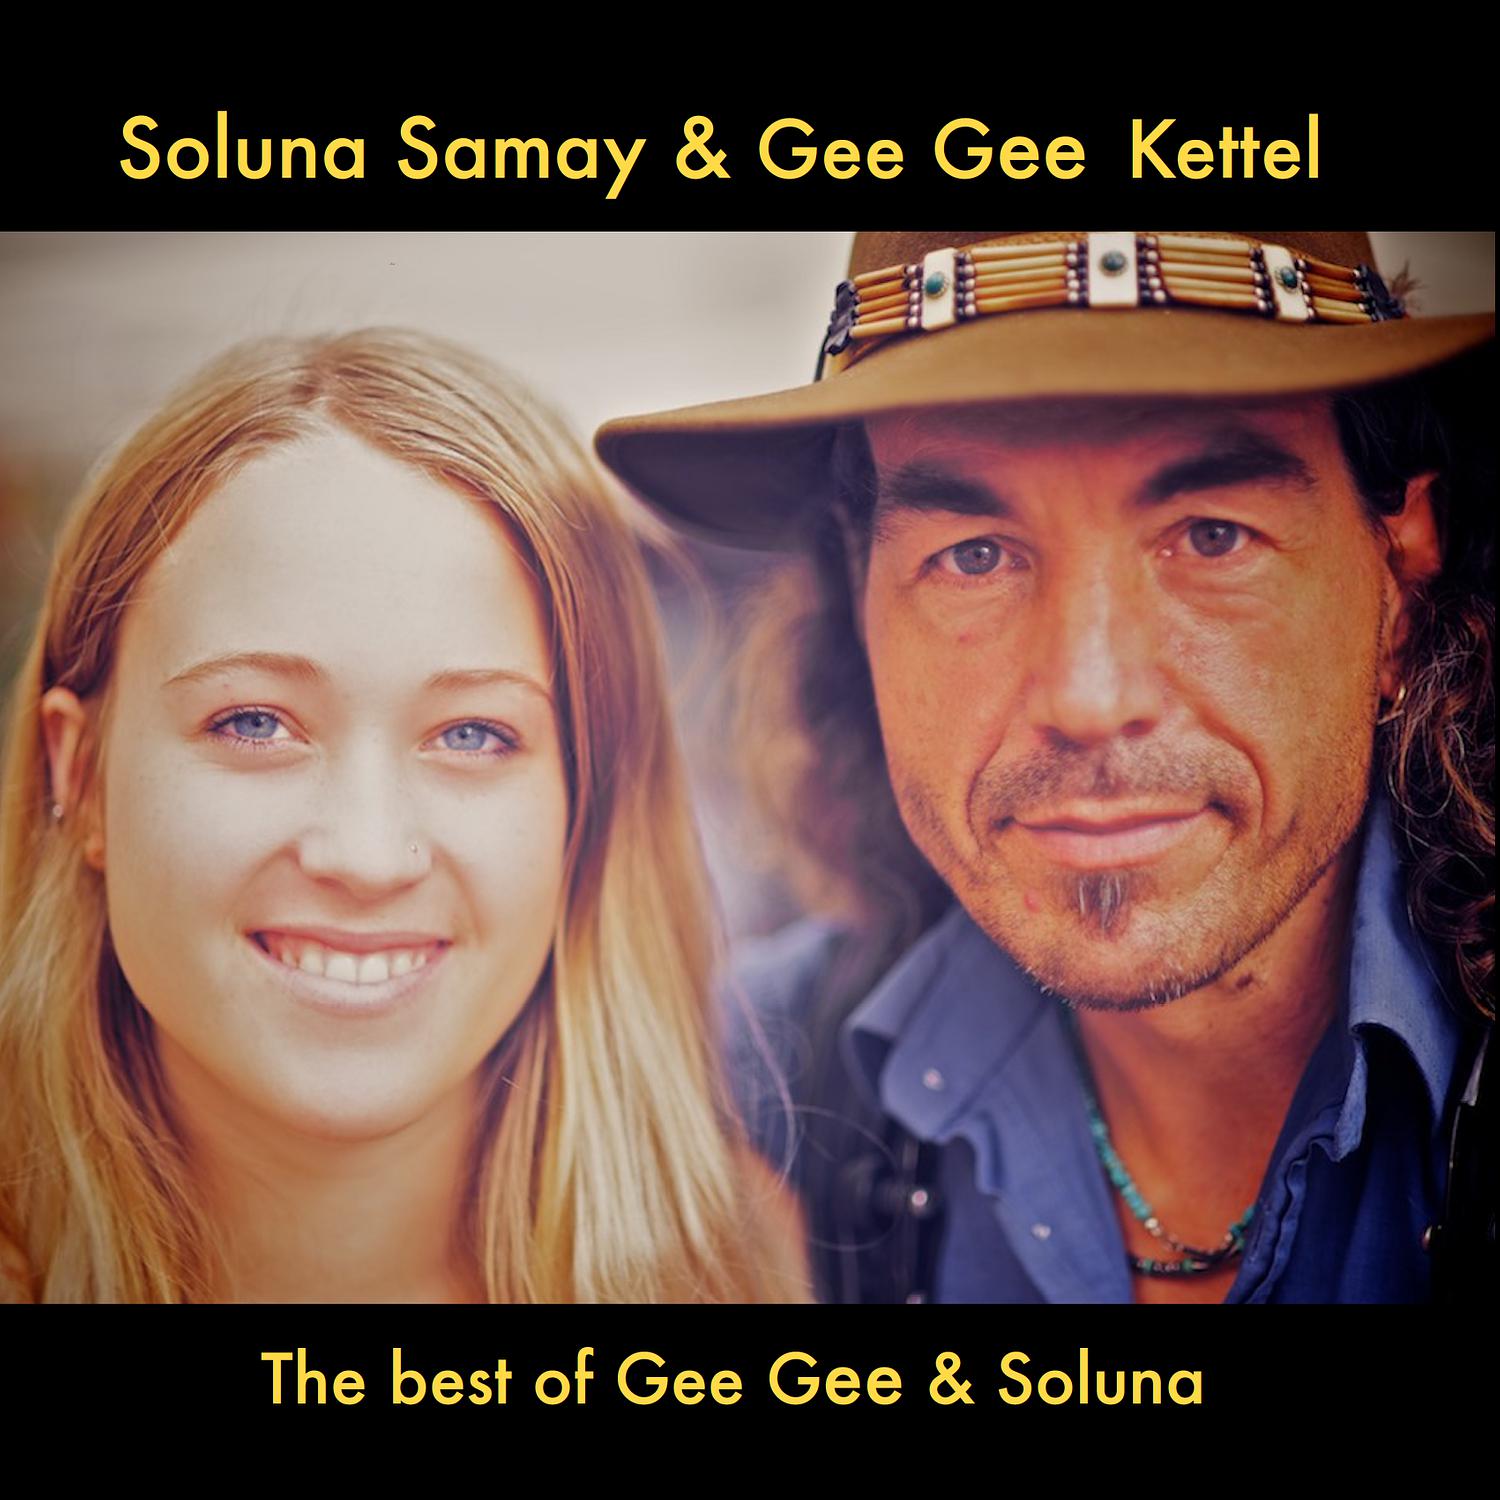 Soluna Samay & Gee Gee Kettel - Riders on the Storm